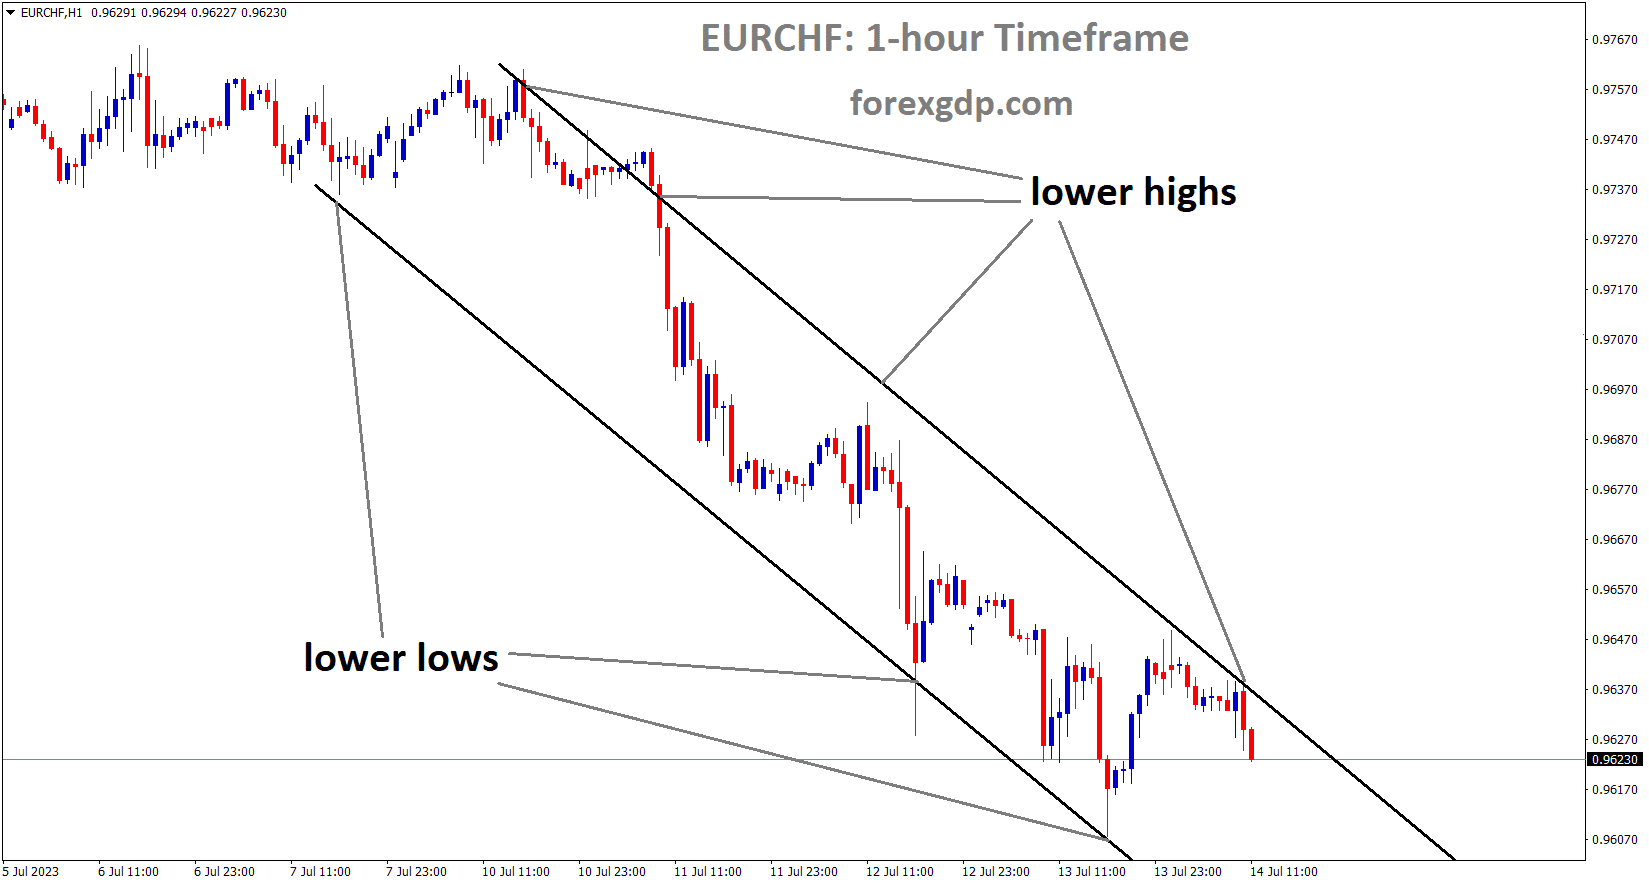 EURCHF is moving in the Descending channel and the market has fallen from the lower high area of the channel 1